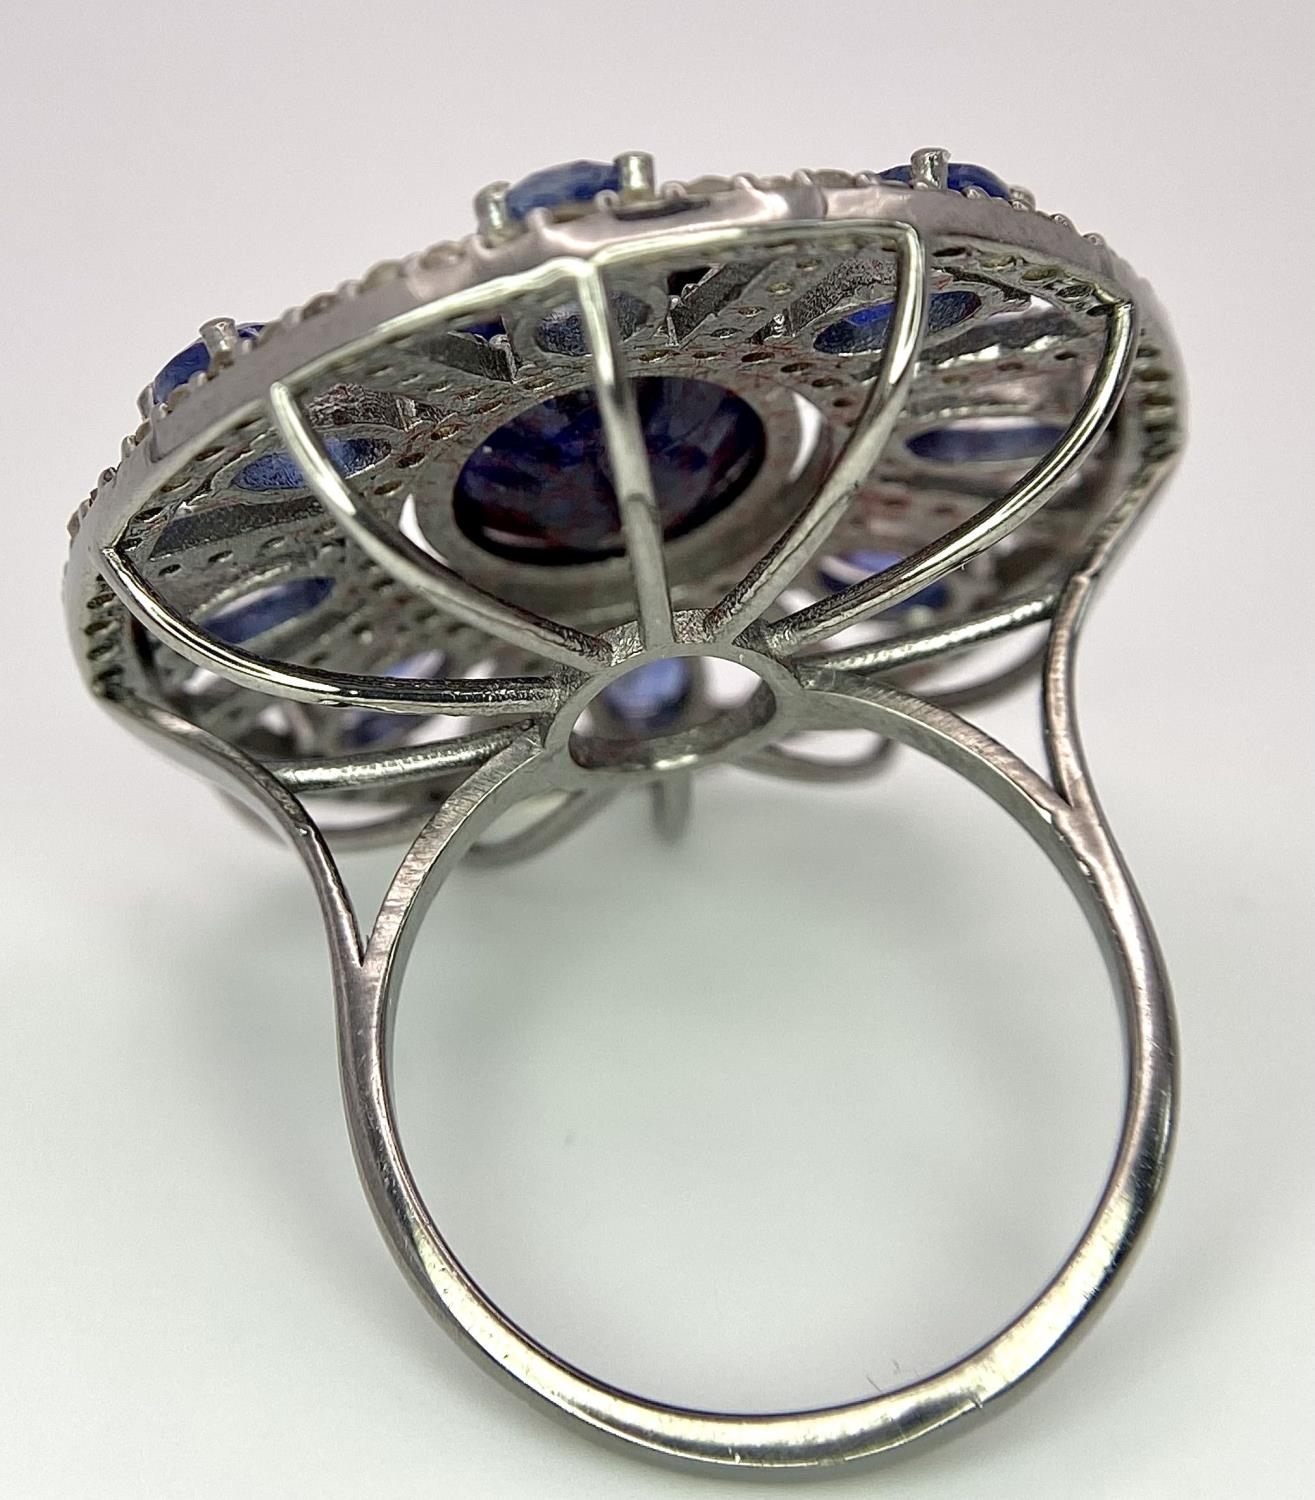 A 10ct Topaz Ring with 6.15ctw of Kyanite surround and 0.50ctw of Diamond Accents. Set in 925 - Image 4 of 6